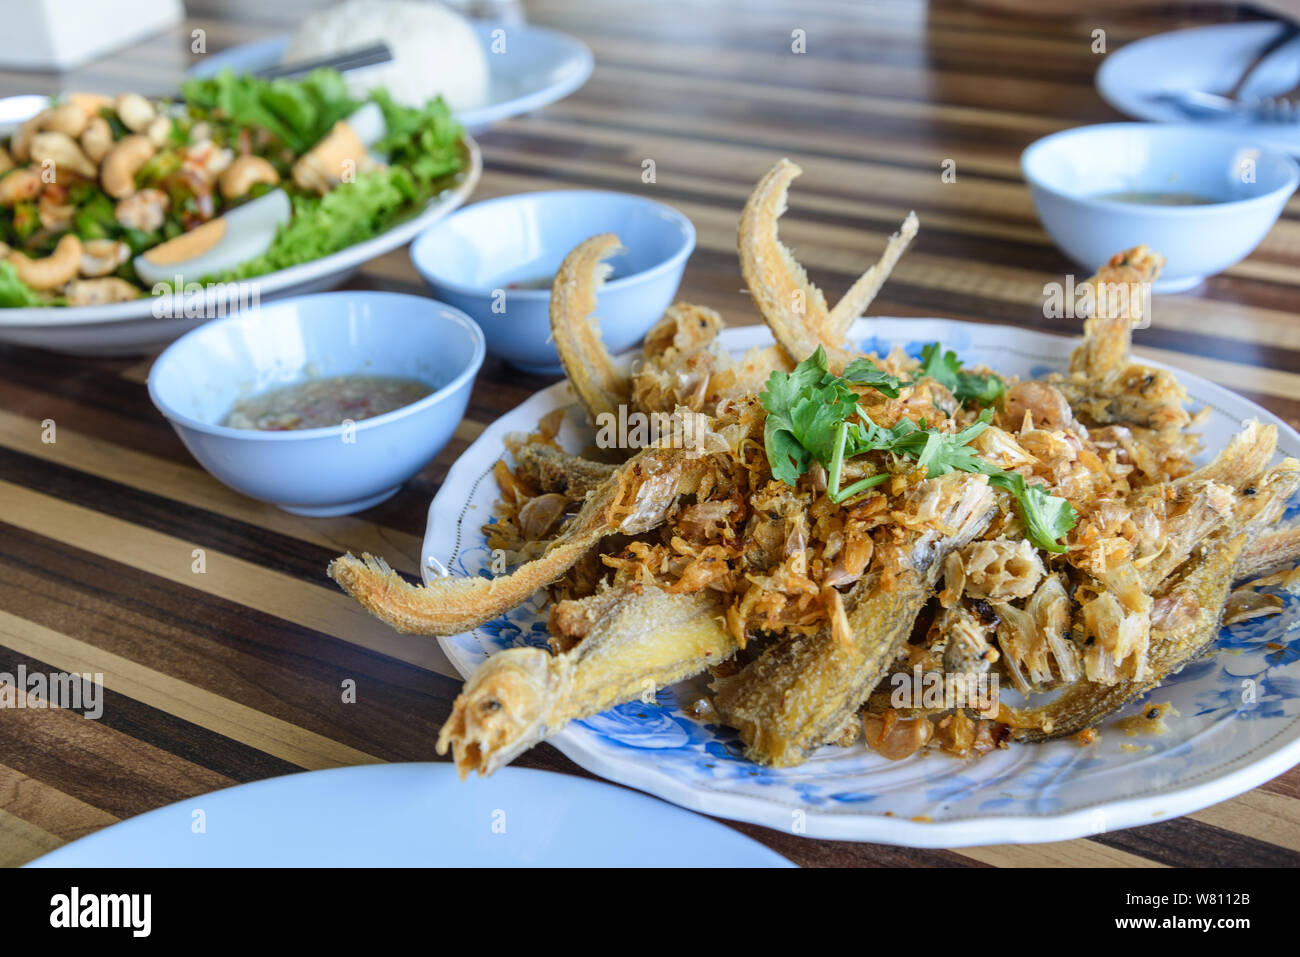 Fried crispy garlic soft fish or sheatfish, famous Thai meal menu for lunch or dinner. Stock Photo